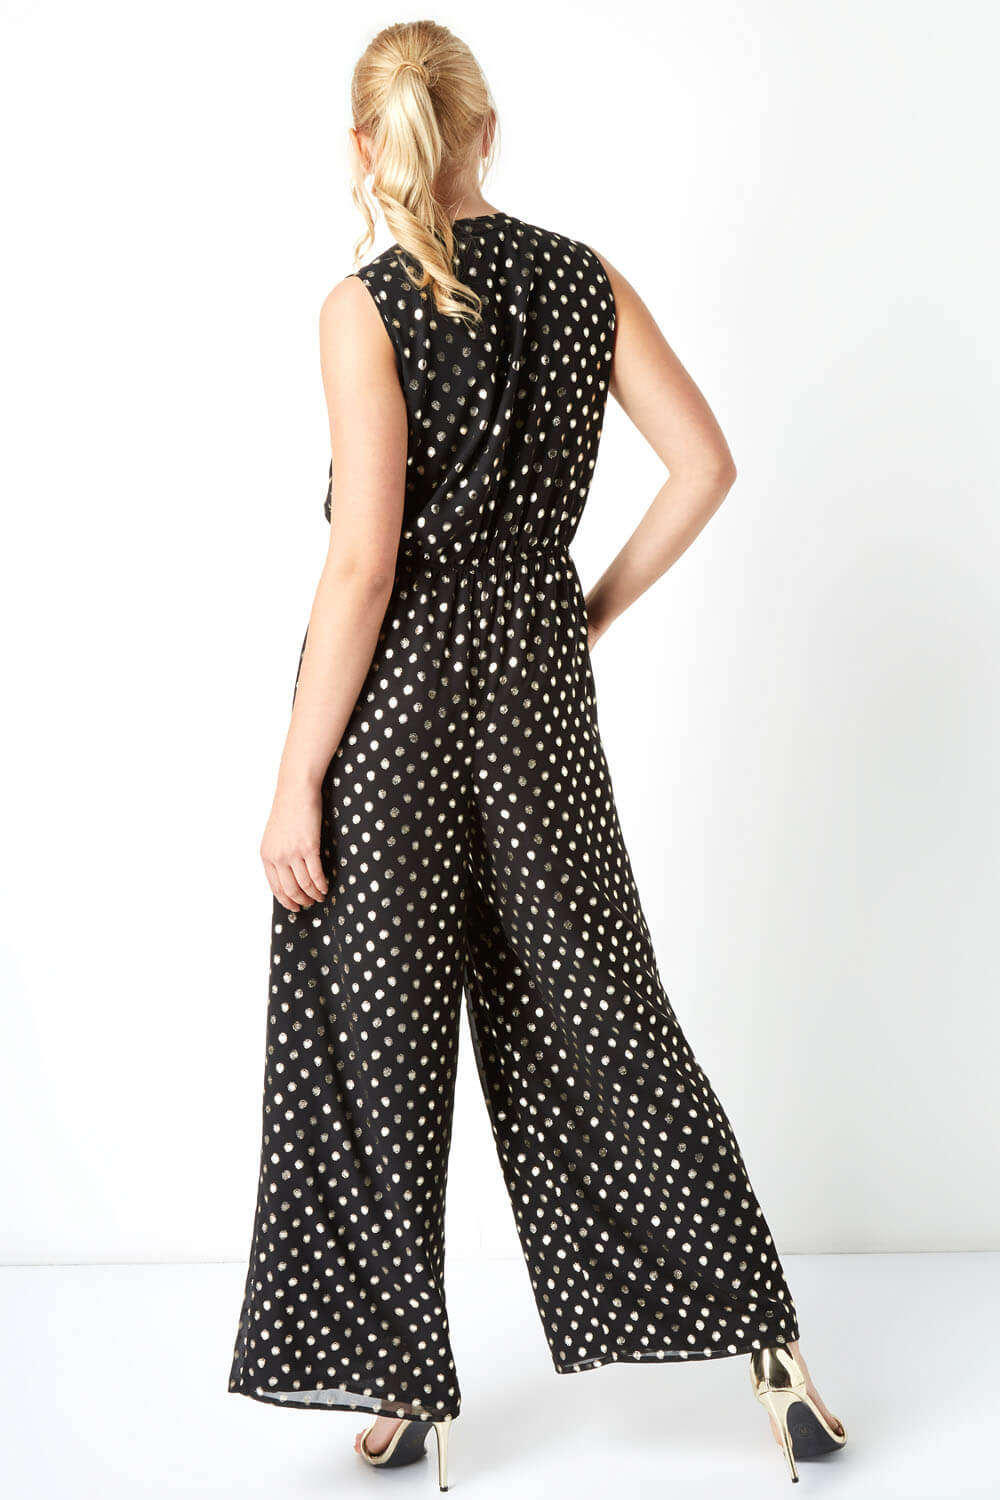 Gold Polka Dot Button Detail Jumpsuit, Image 2 of 4